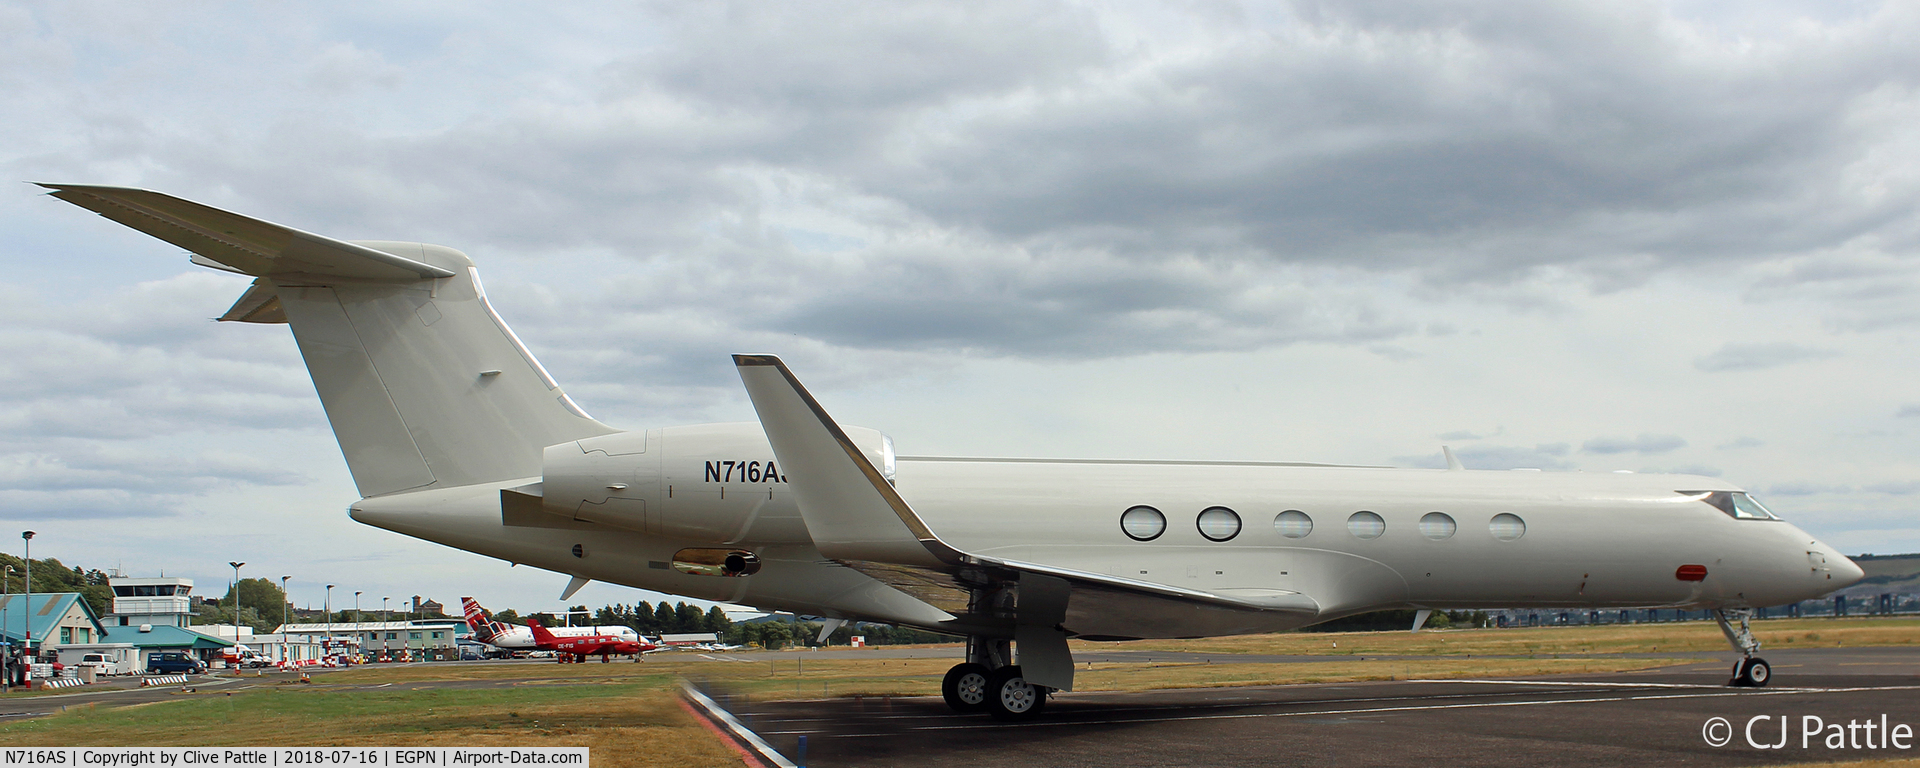 N716AS, 2002 Gulfstream Aerospace Gulfstream V C/N 687, Parked at Dundee for the 2018 British Open Golf Championships at nearby Carnoustie.